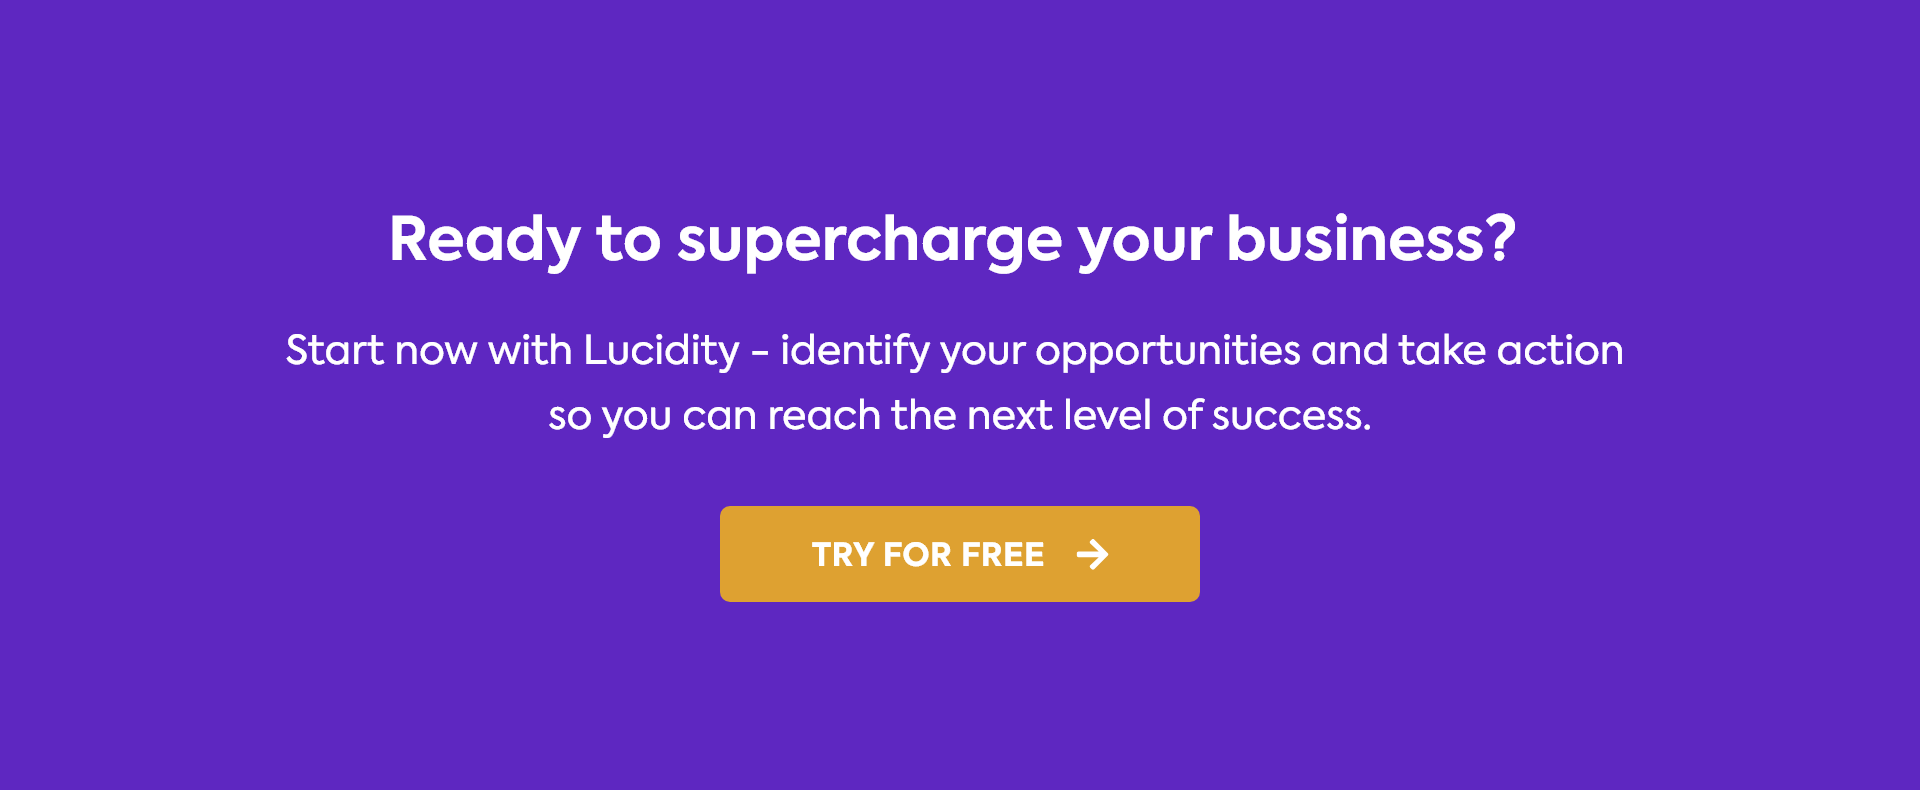 Ready to supercharge your business?